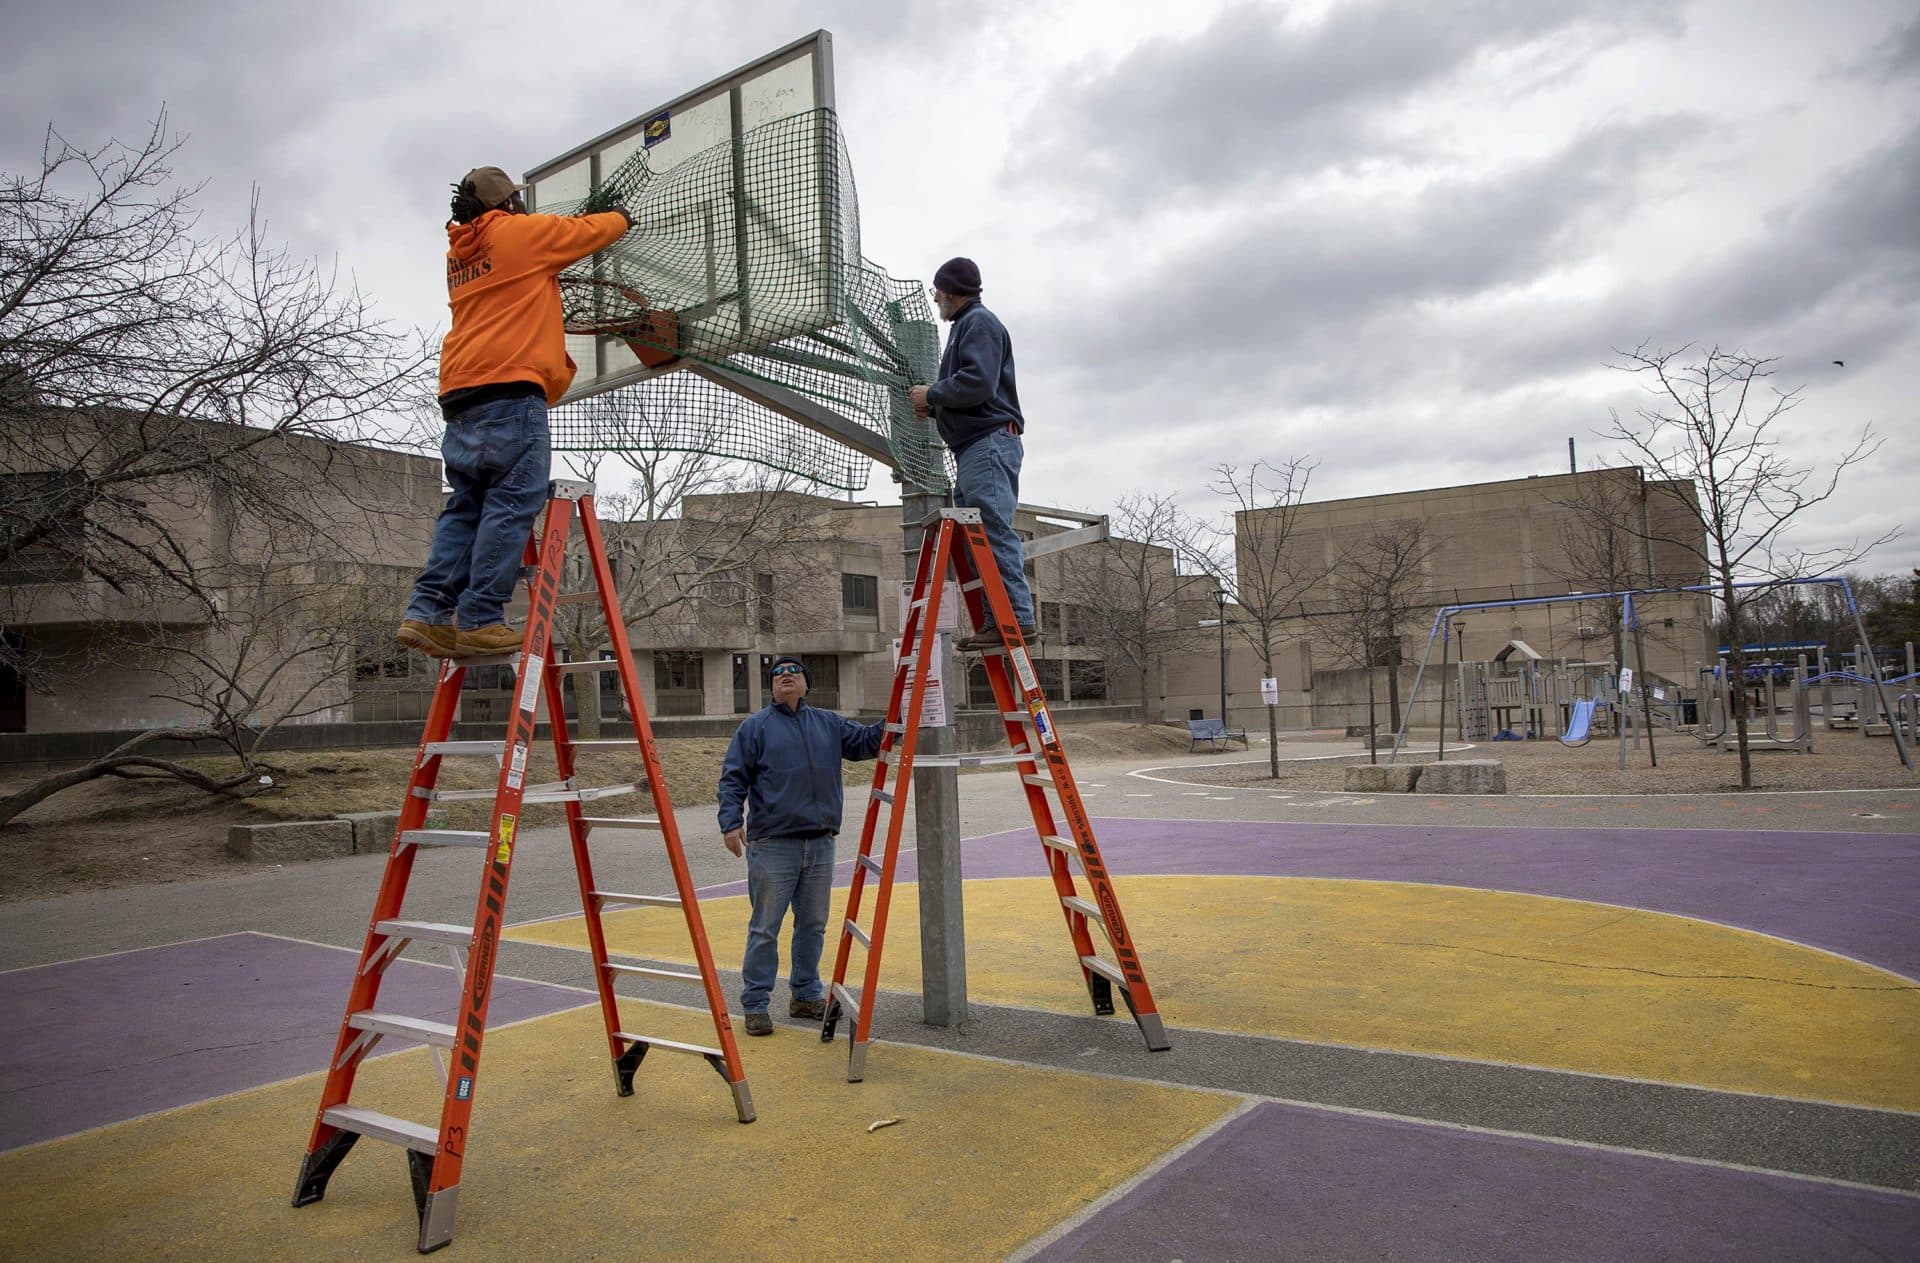 March 23: Cambridge Department of Public Works staff wrap a basketball hoop in plastic fencing to discourage team games. (Robin Lubbock/WBUR)